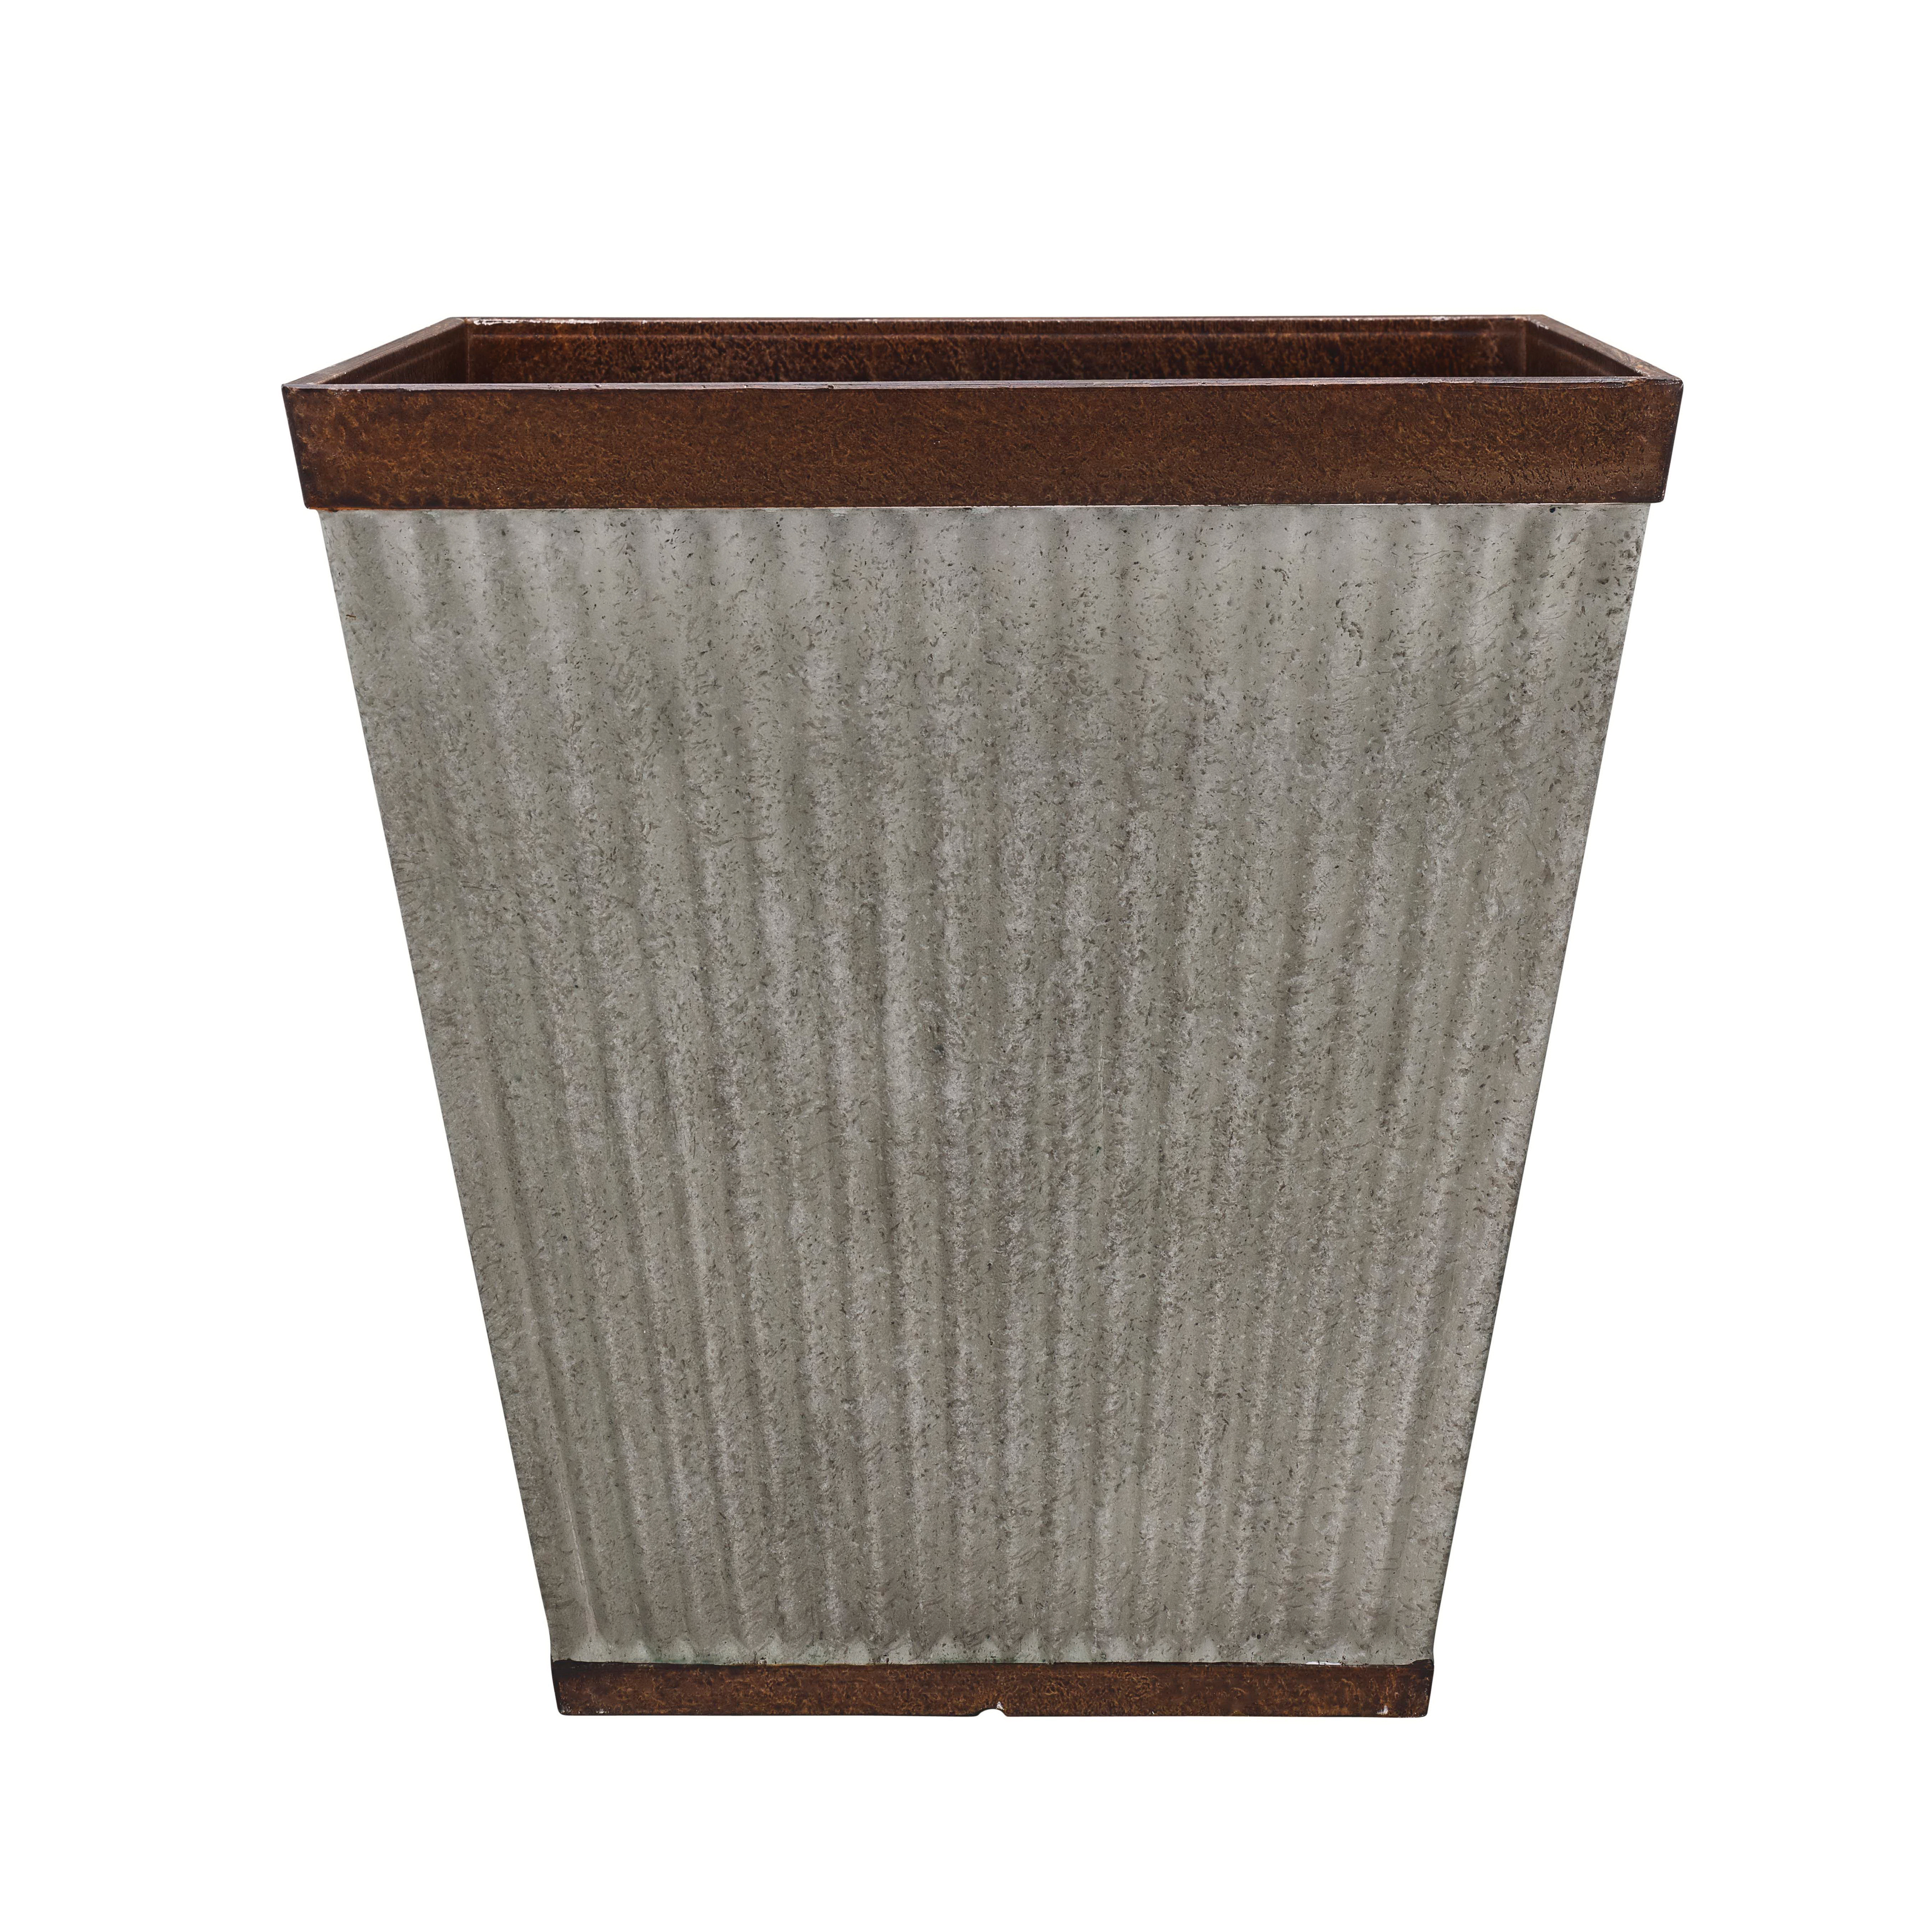 HDR-046851 Planter, 16 in H, 16 in W, 16 in D, Square, Resin, Rustic Galvanized, Silvery